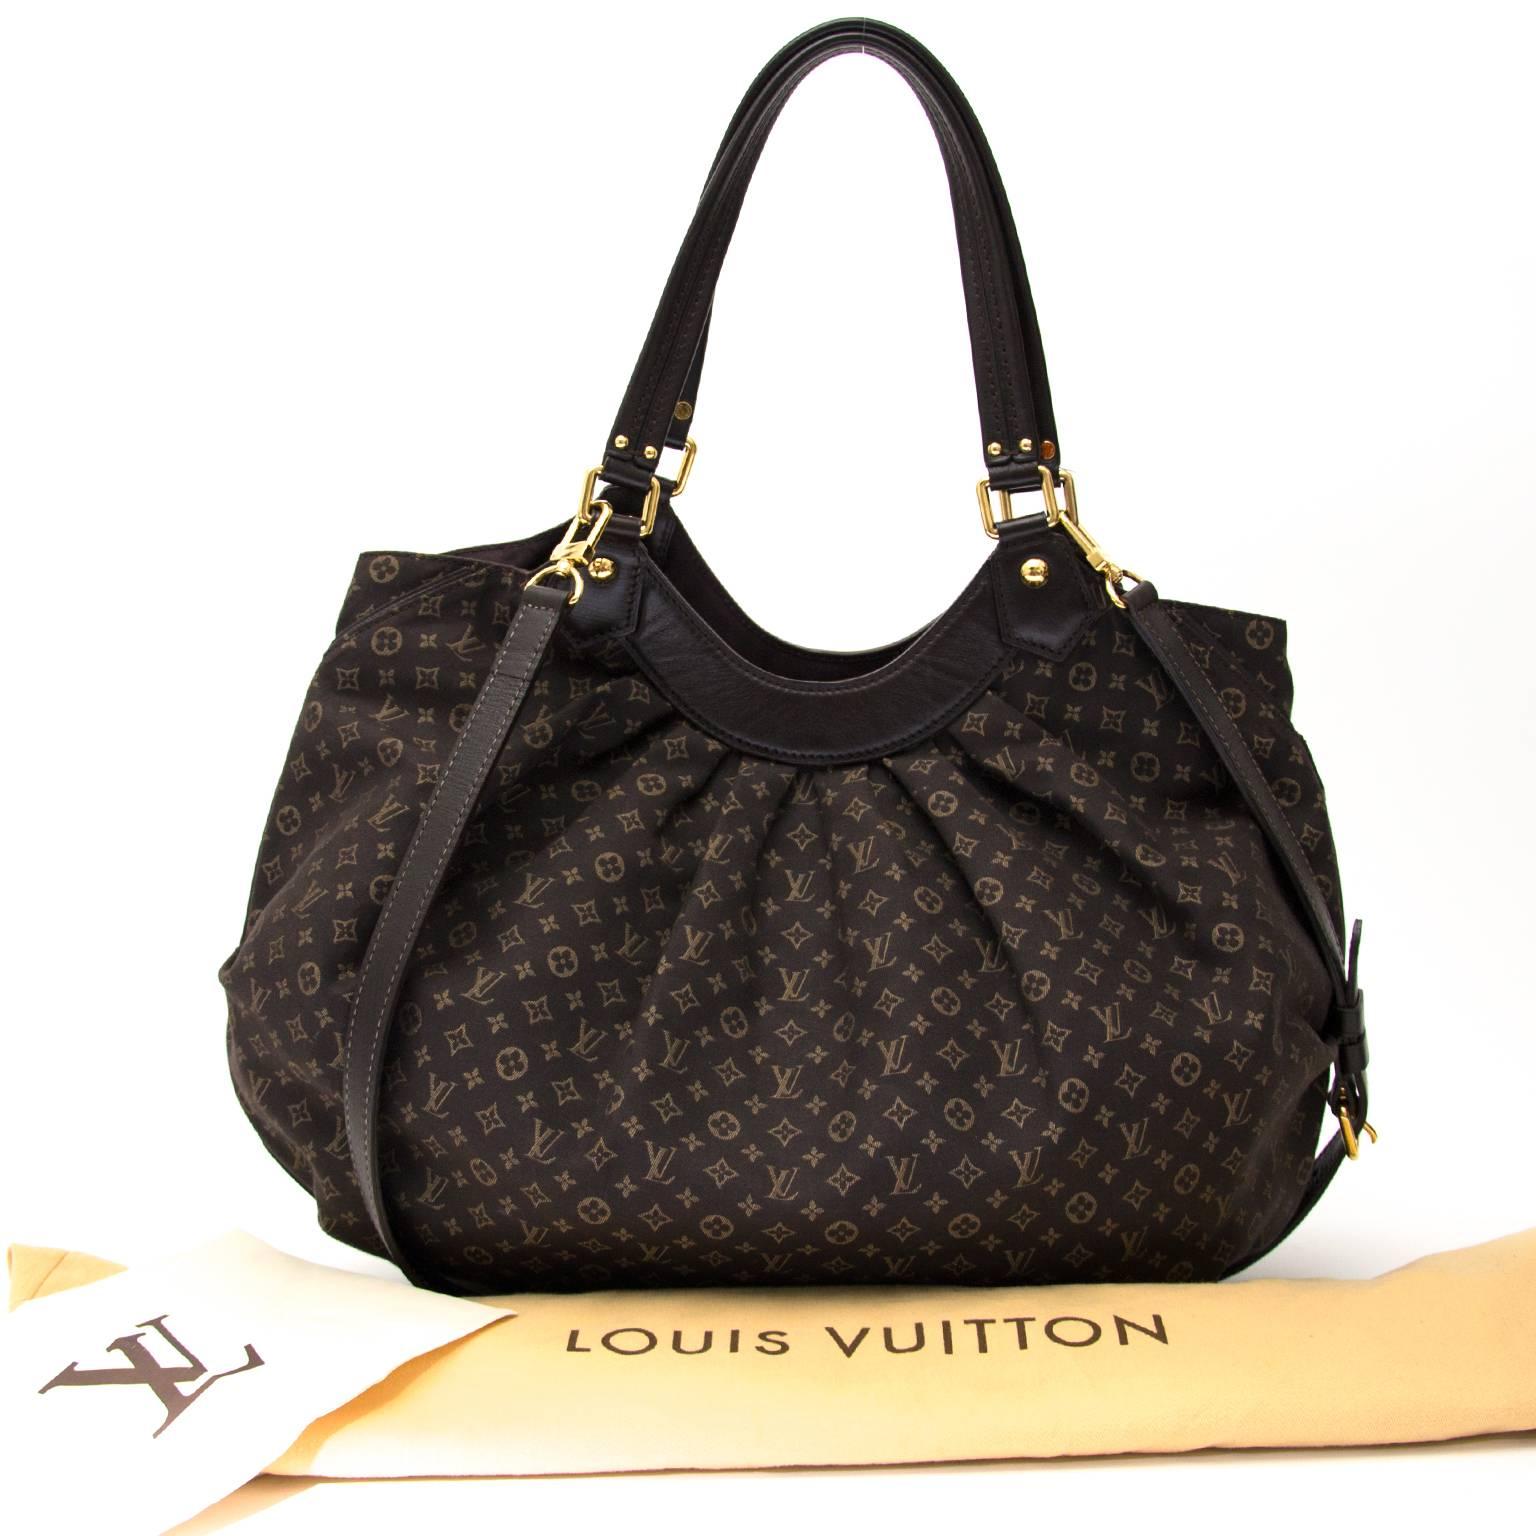 Louis Vuitton Monogram Fantaisie bag with complimenting tall shoulder straps in black leather. The spacious and practical interior is accessed through gold-toned magnetic press button and contains three slip pockets, from which one with zipper. The